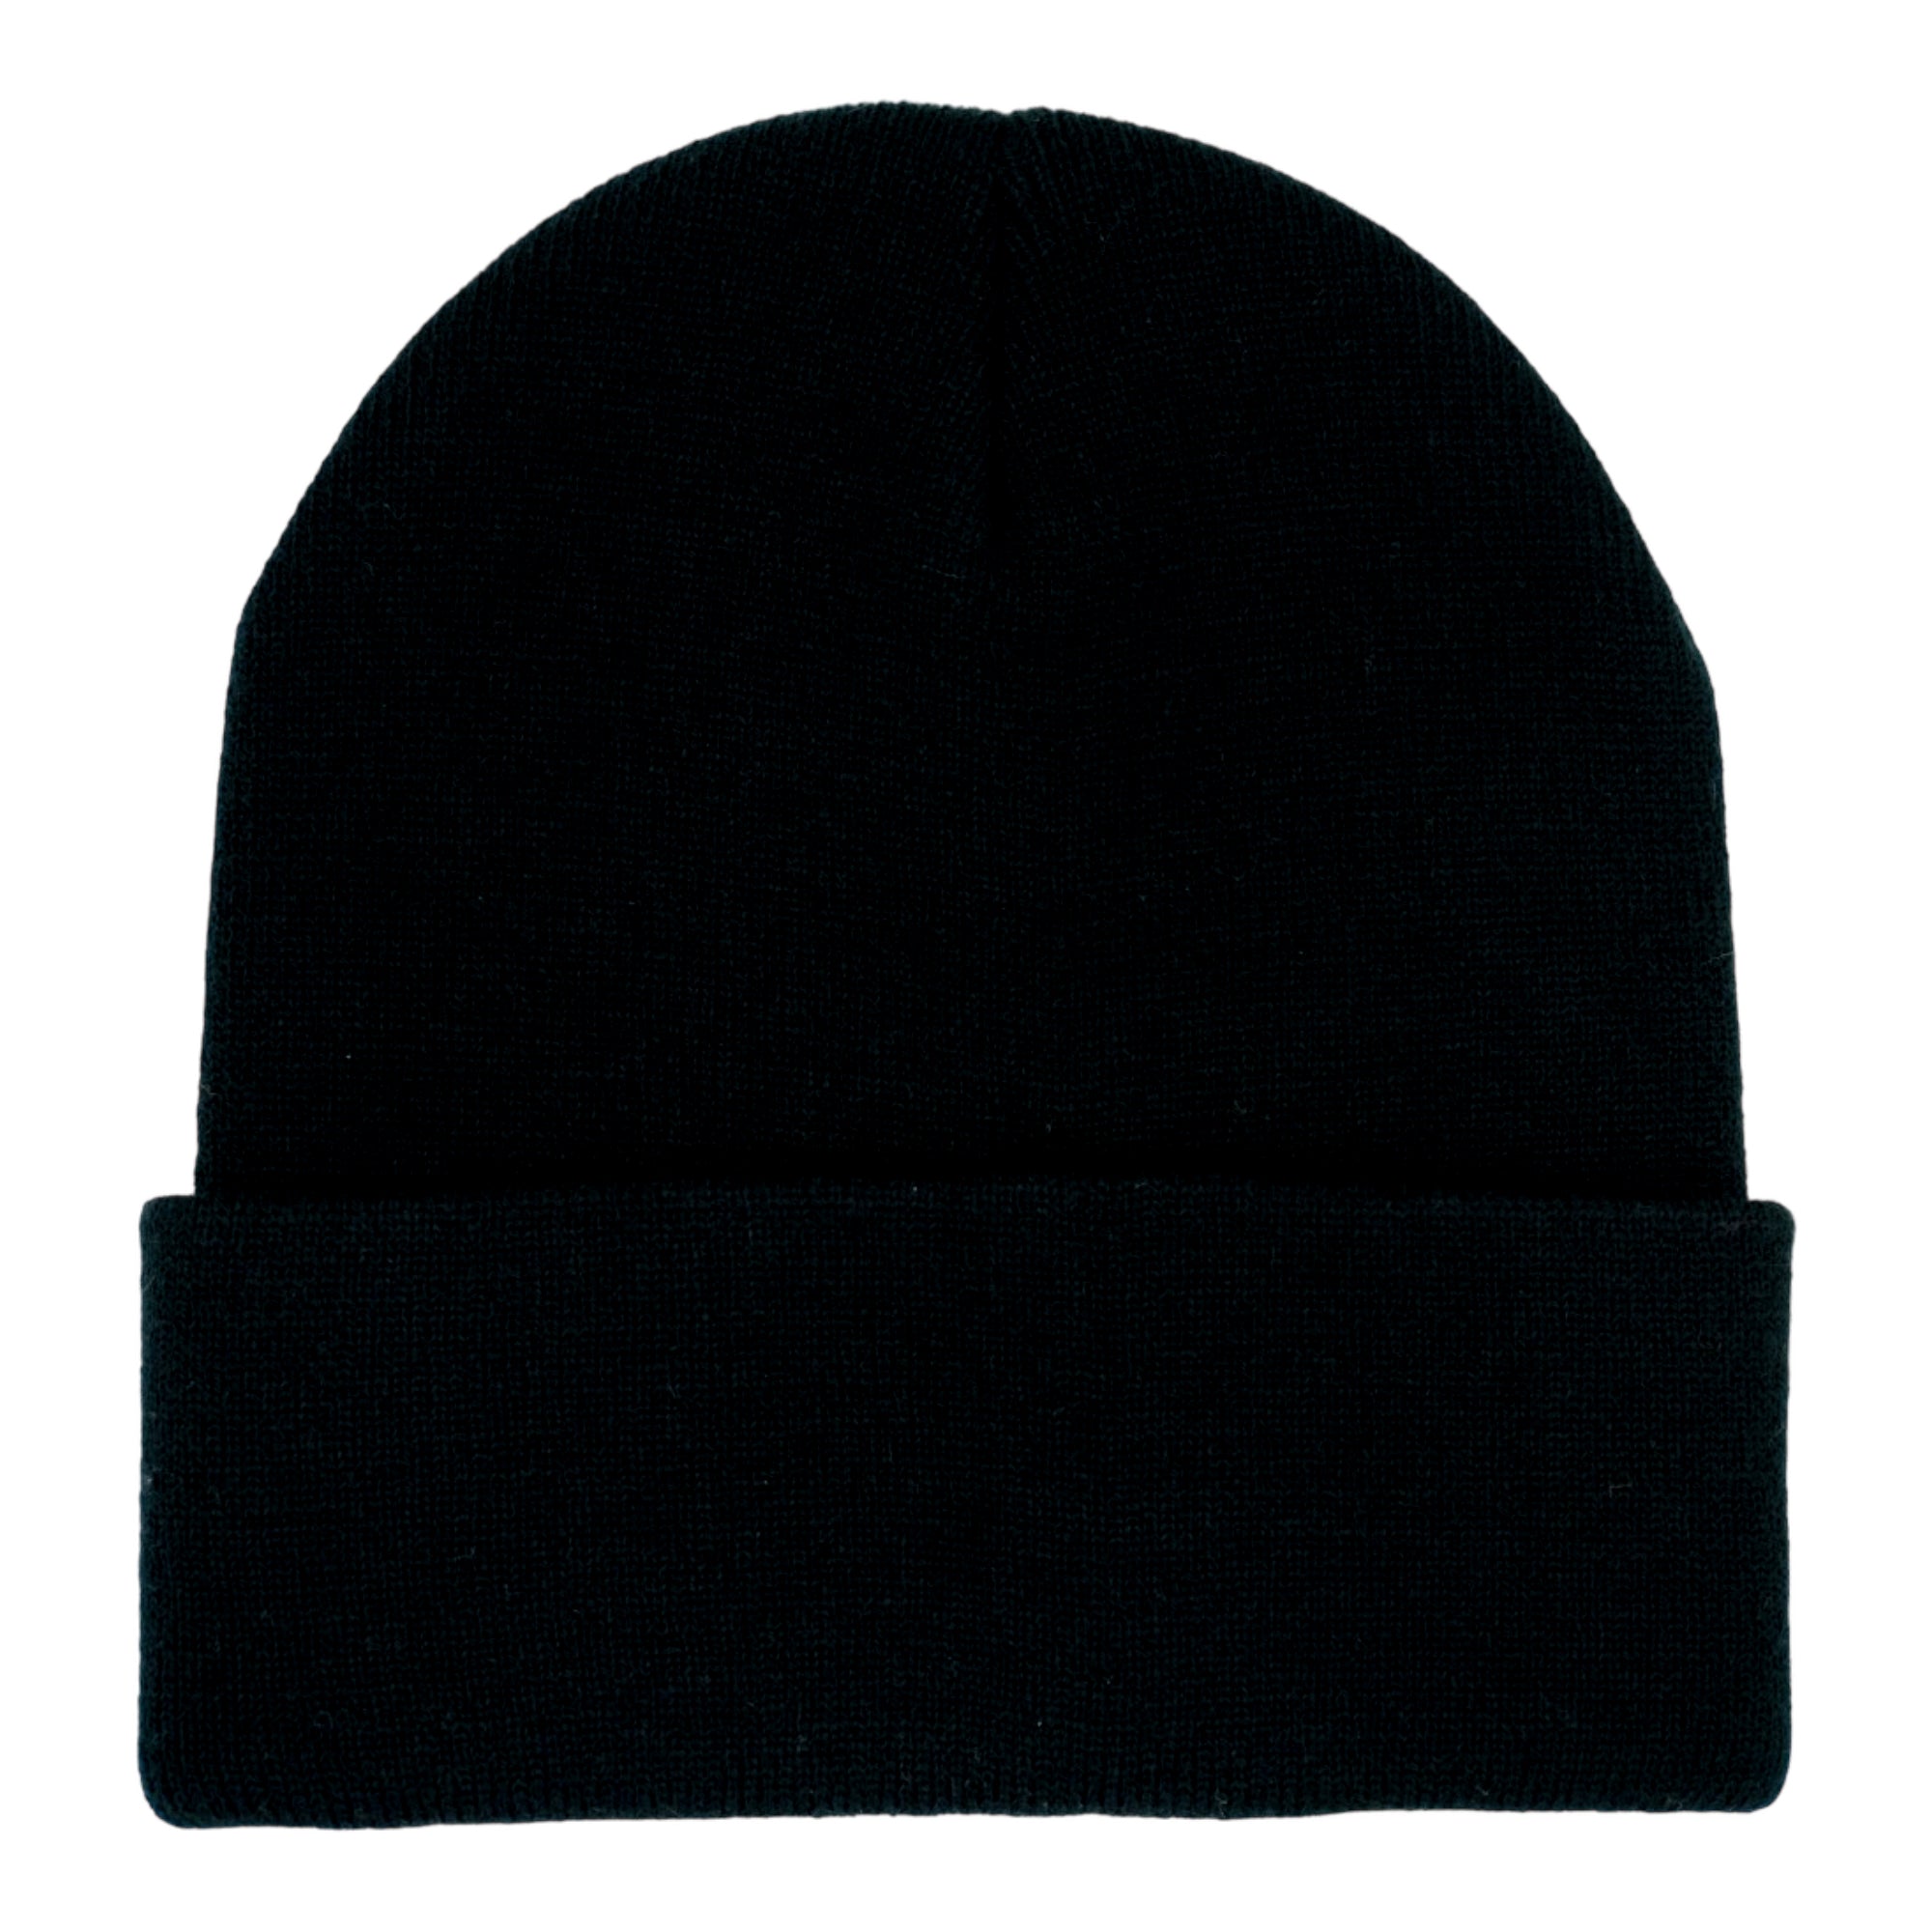 MUKA - THANK YOU FOR FUCKING WITH US BEANIE - BLACK